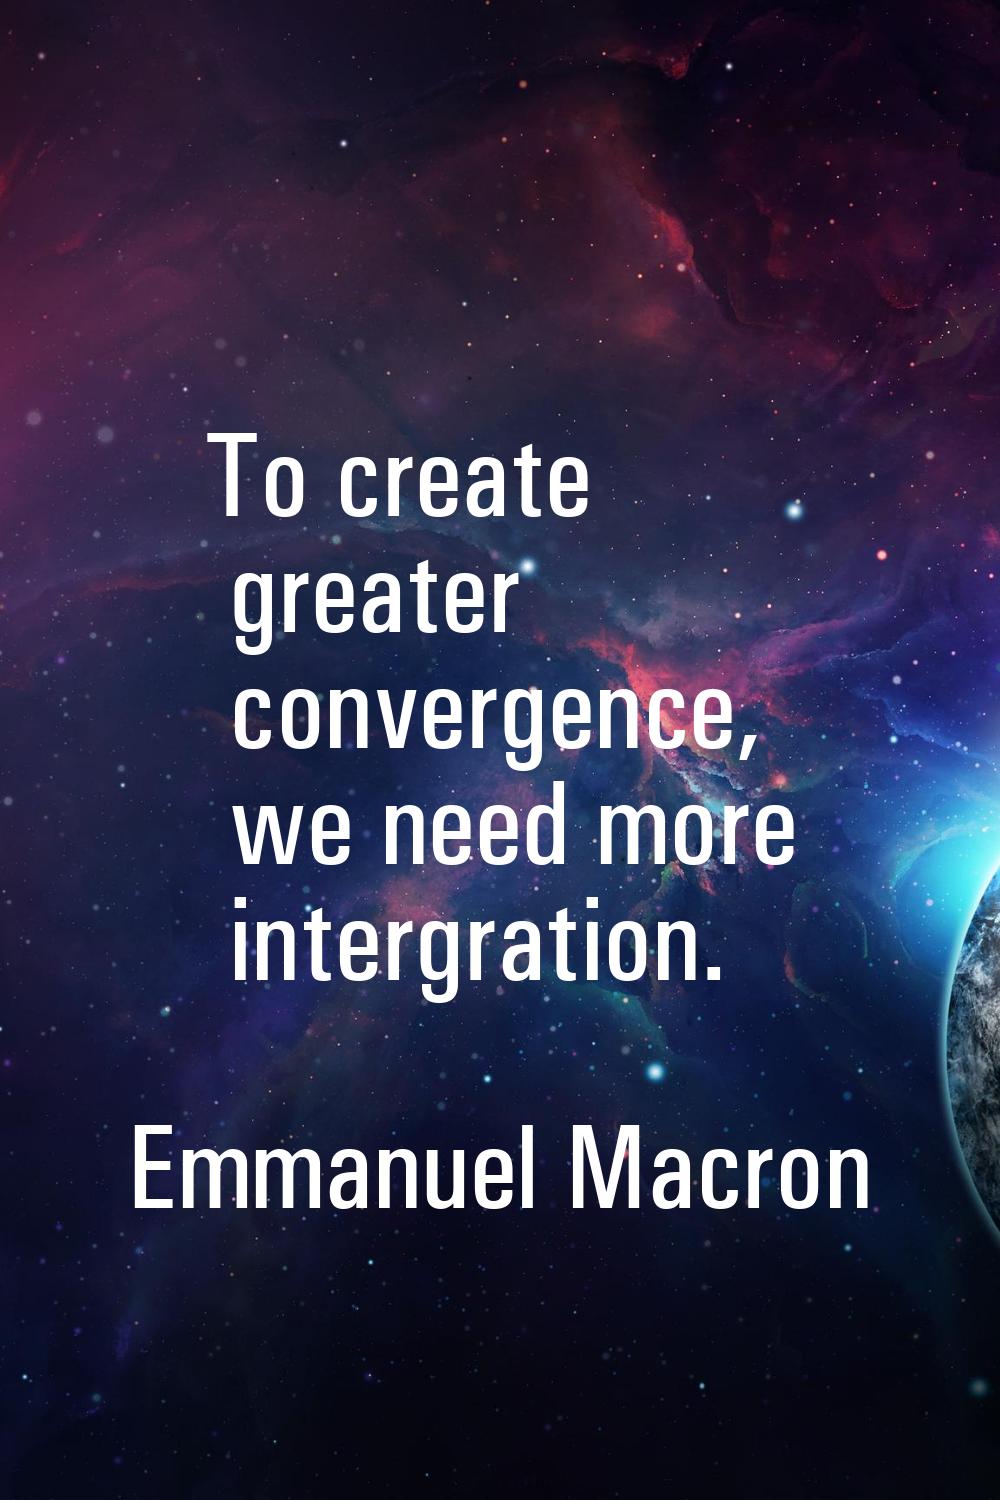 To create greater convergence, we need more intergration.